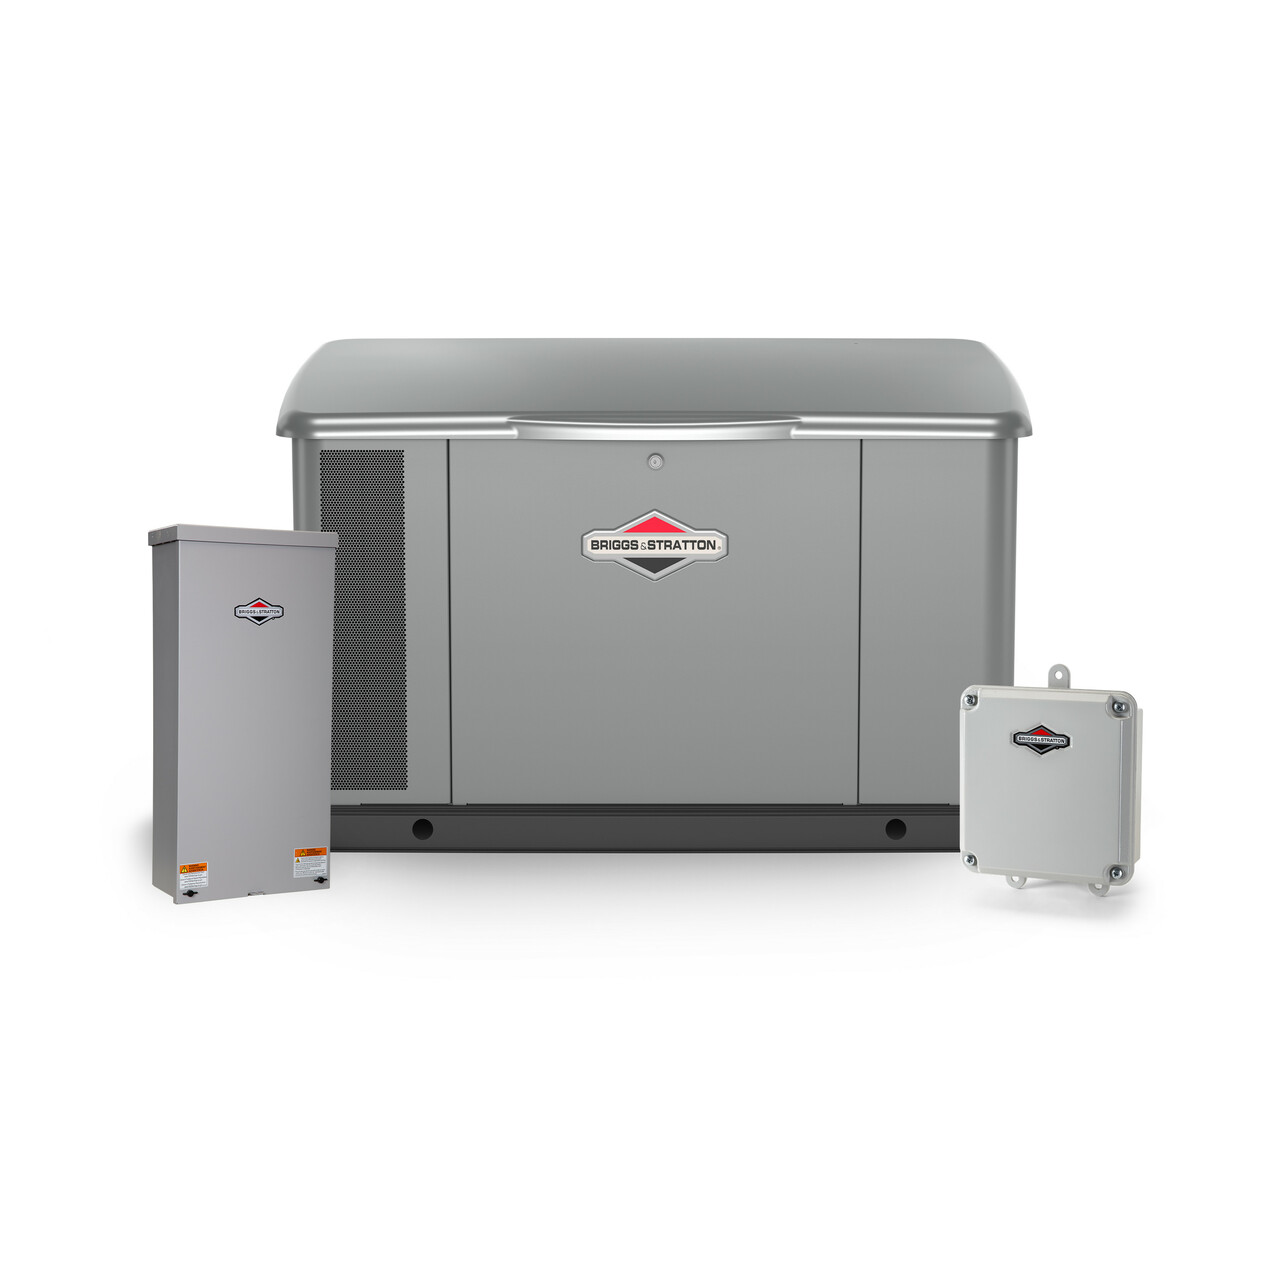 Briggs & Stratton 20kW Standby Generator System w/ Wi-Fi (Steel) (150A Service + Amplify Power Mgmt.) - ORCHARD GENERATOR